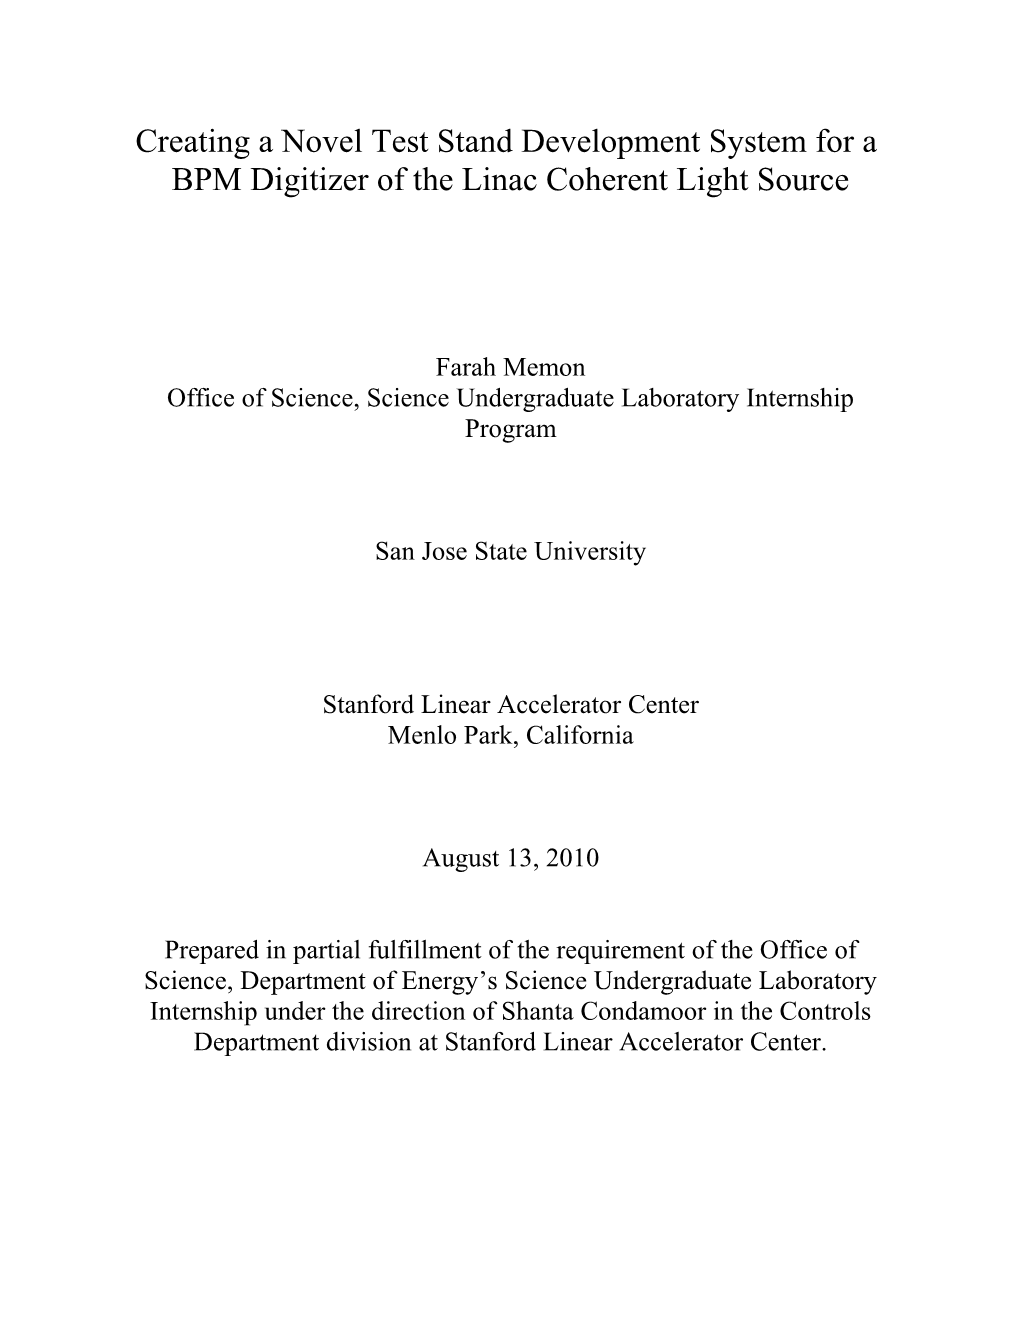 BPM Digitizer of the Linac Coherent Light Source